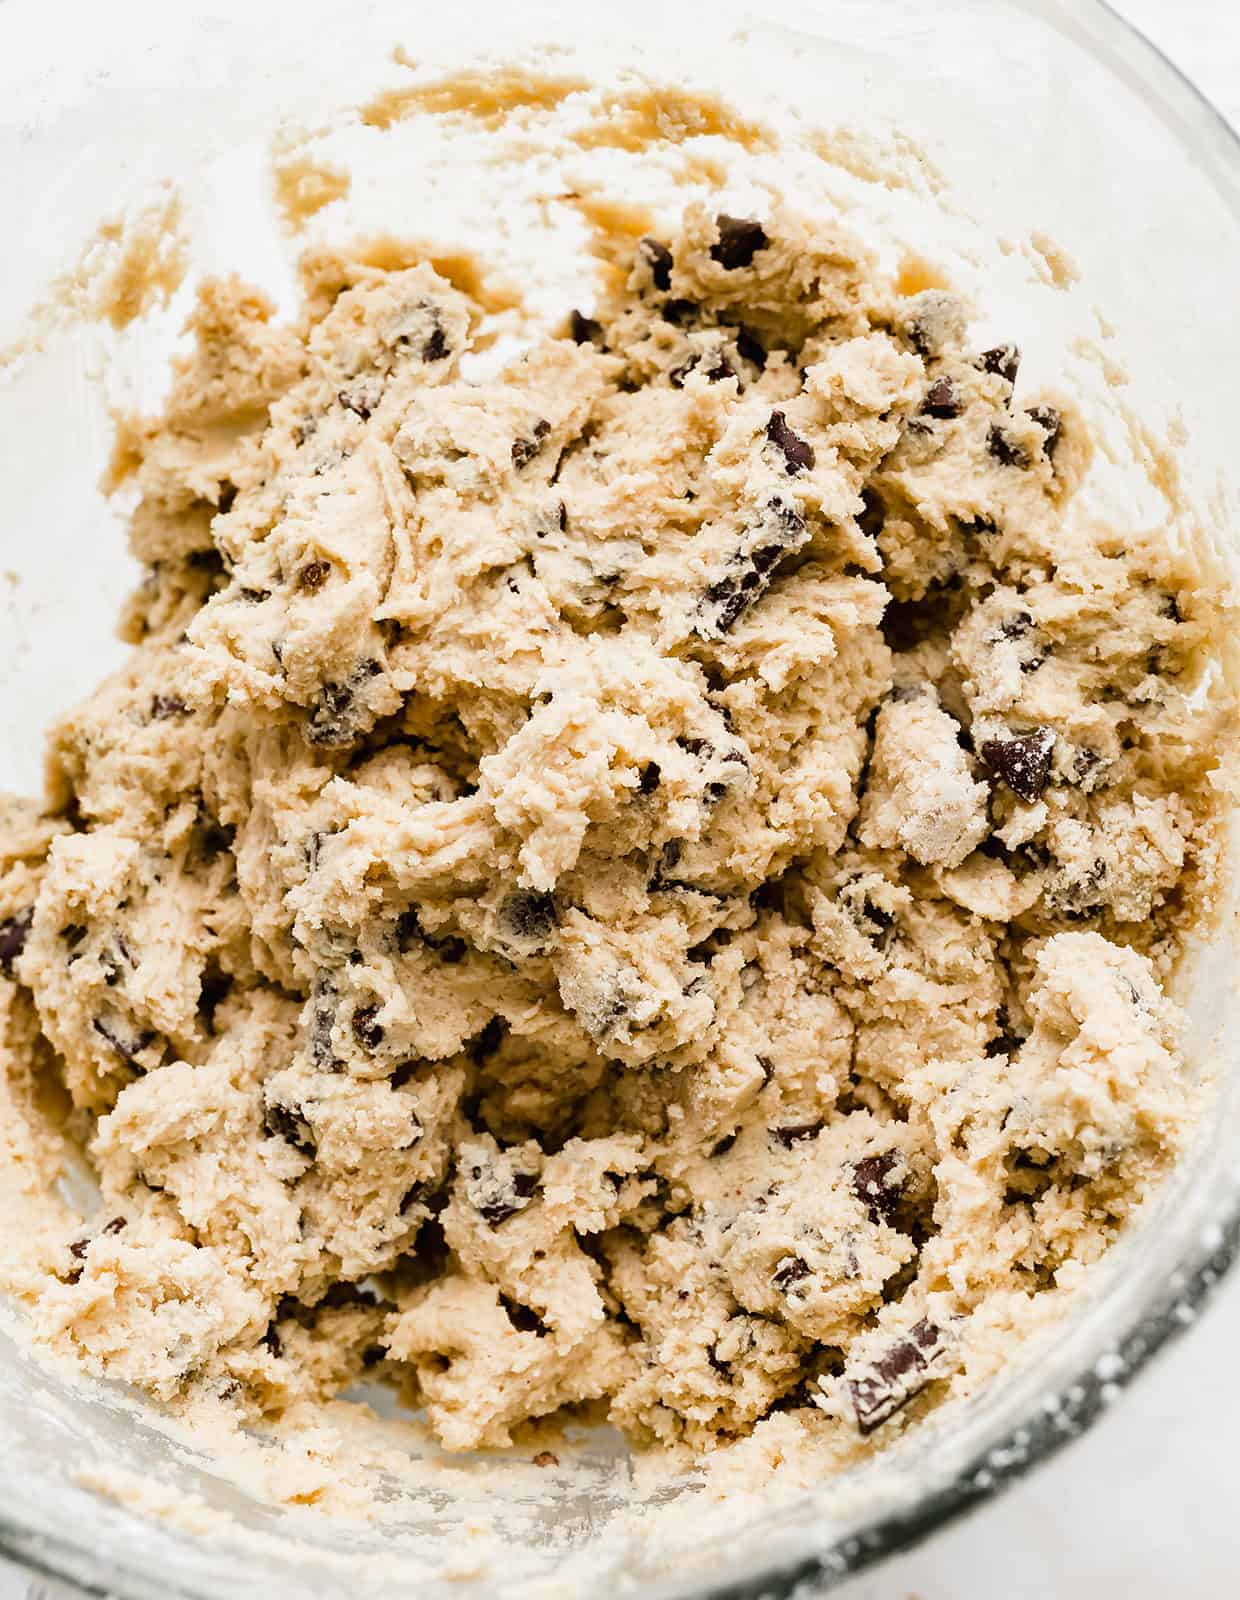 Chocolate Chip Cookie dough batter.